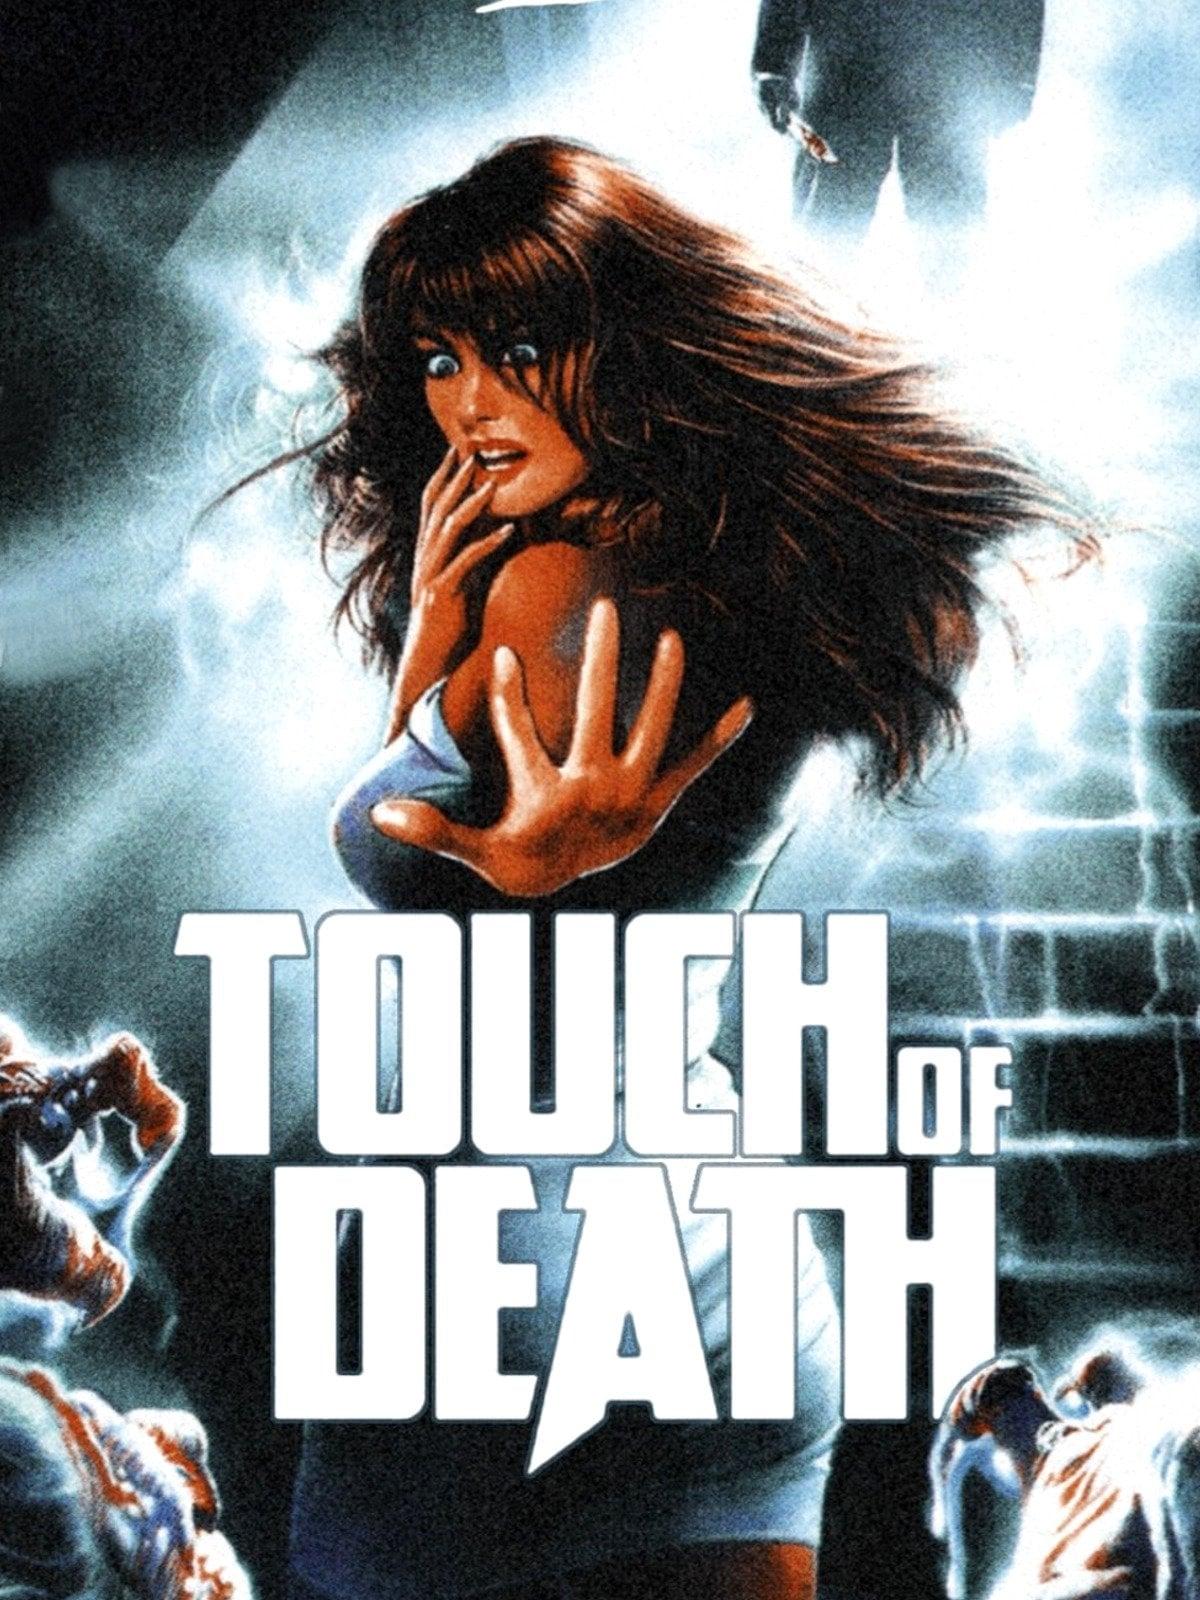 Touch of Death poster